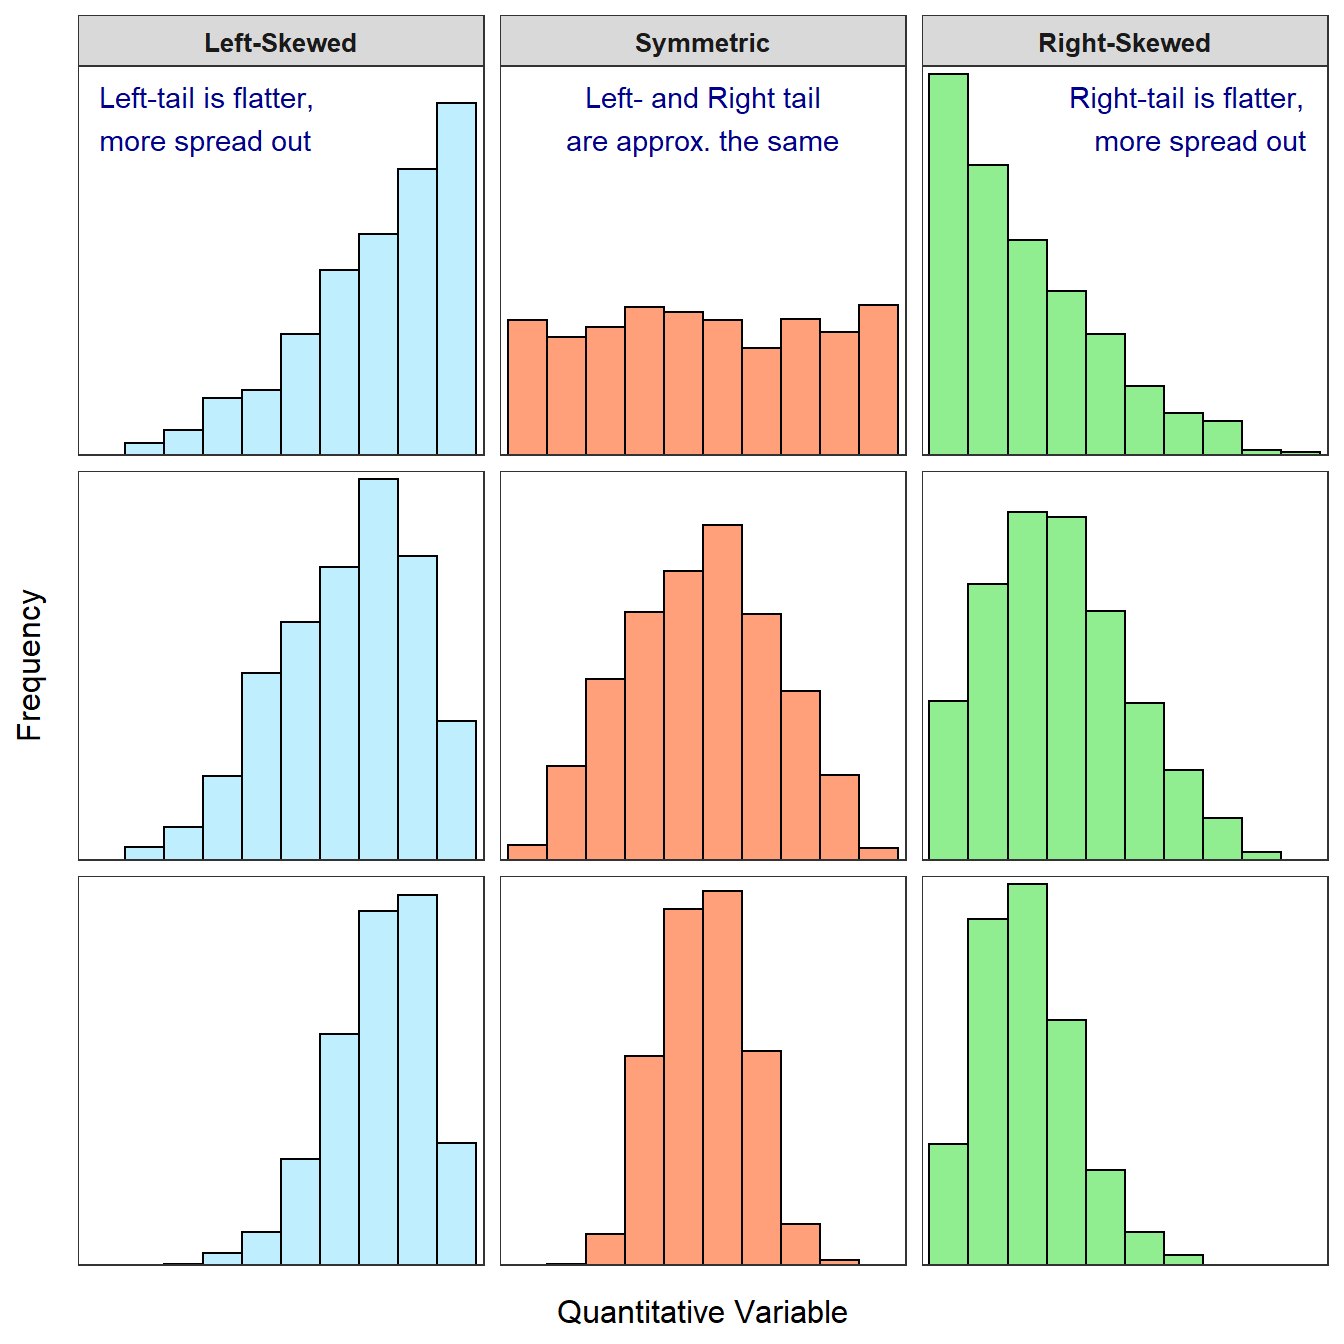 Examples of left-skewed, approximately symmetric, and right-skewed histograms. The skewed distributions are more skewed in the top row and less skewed in the bottom row.